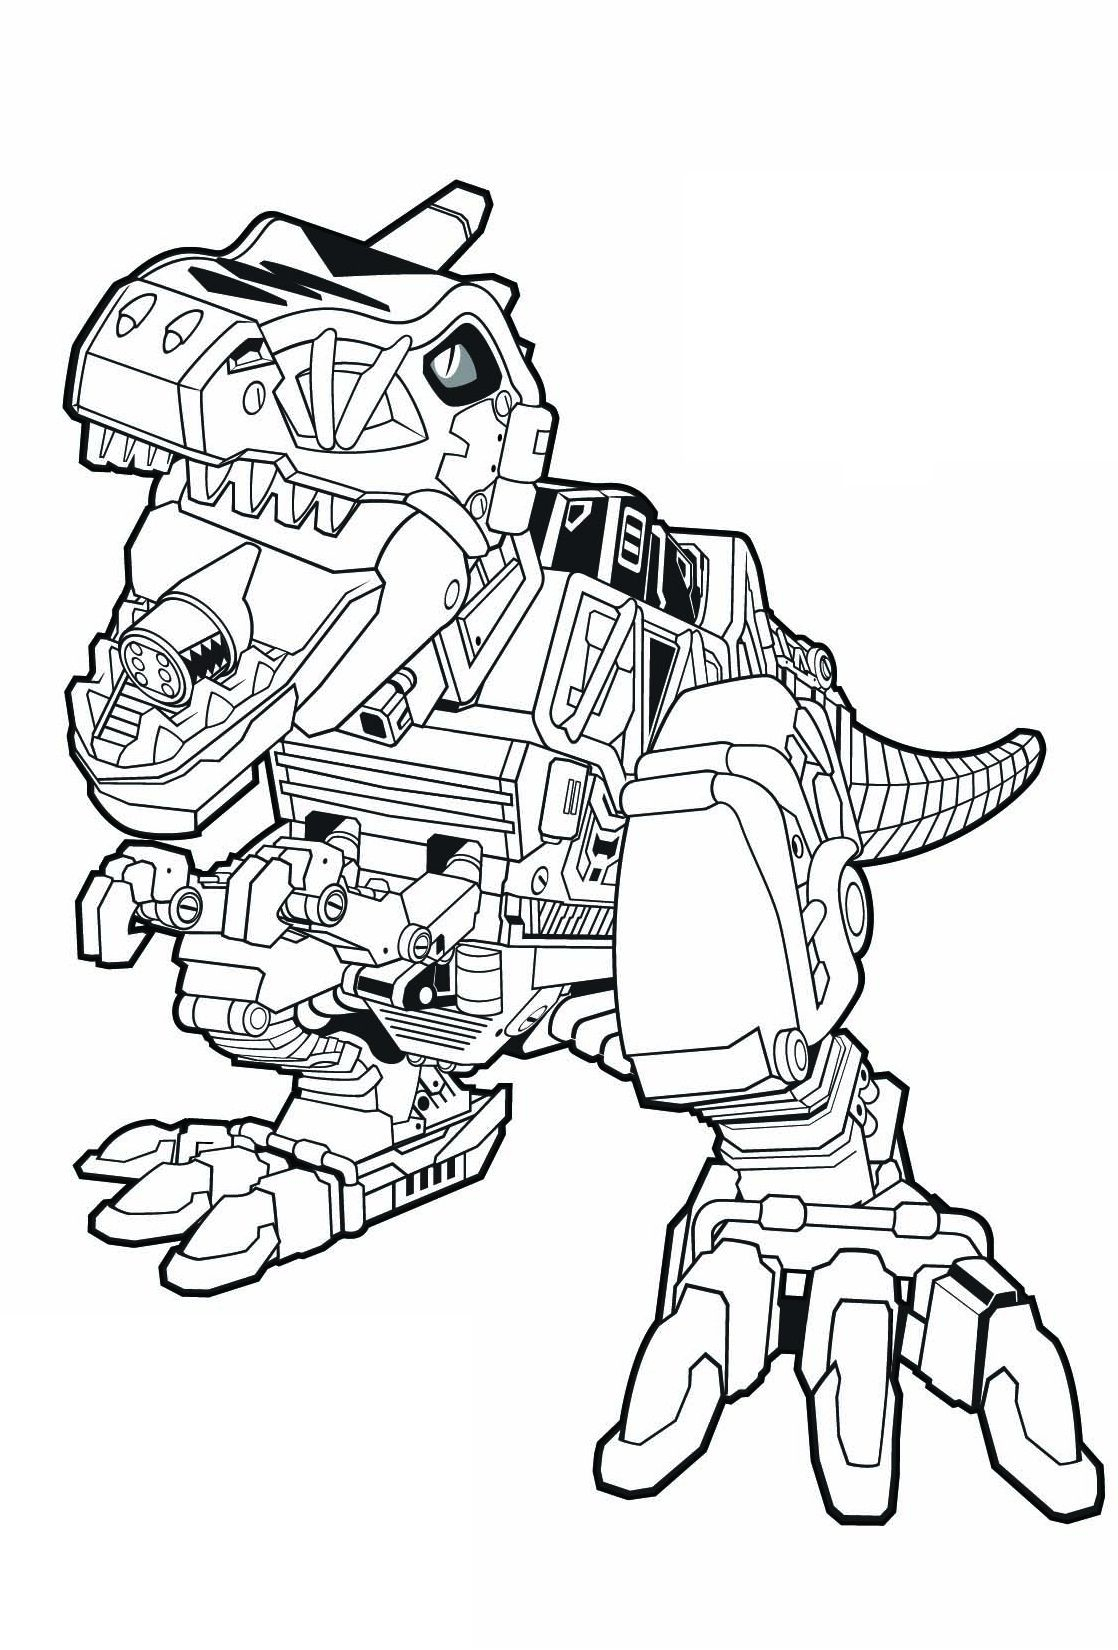 Red Zord - Dino Charge - Power Rangers | Power Rangers Coloring Pages concernant Dessin Power Rangers Dino Fury